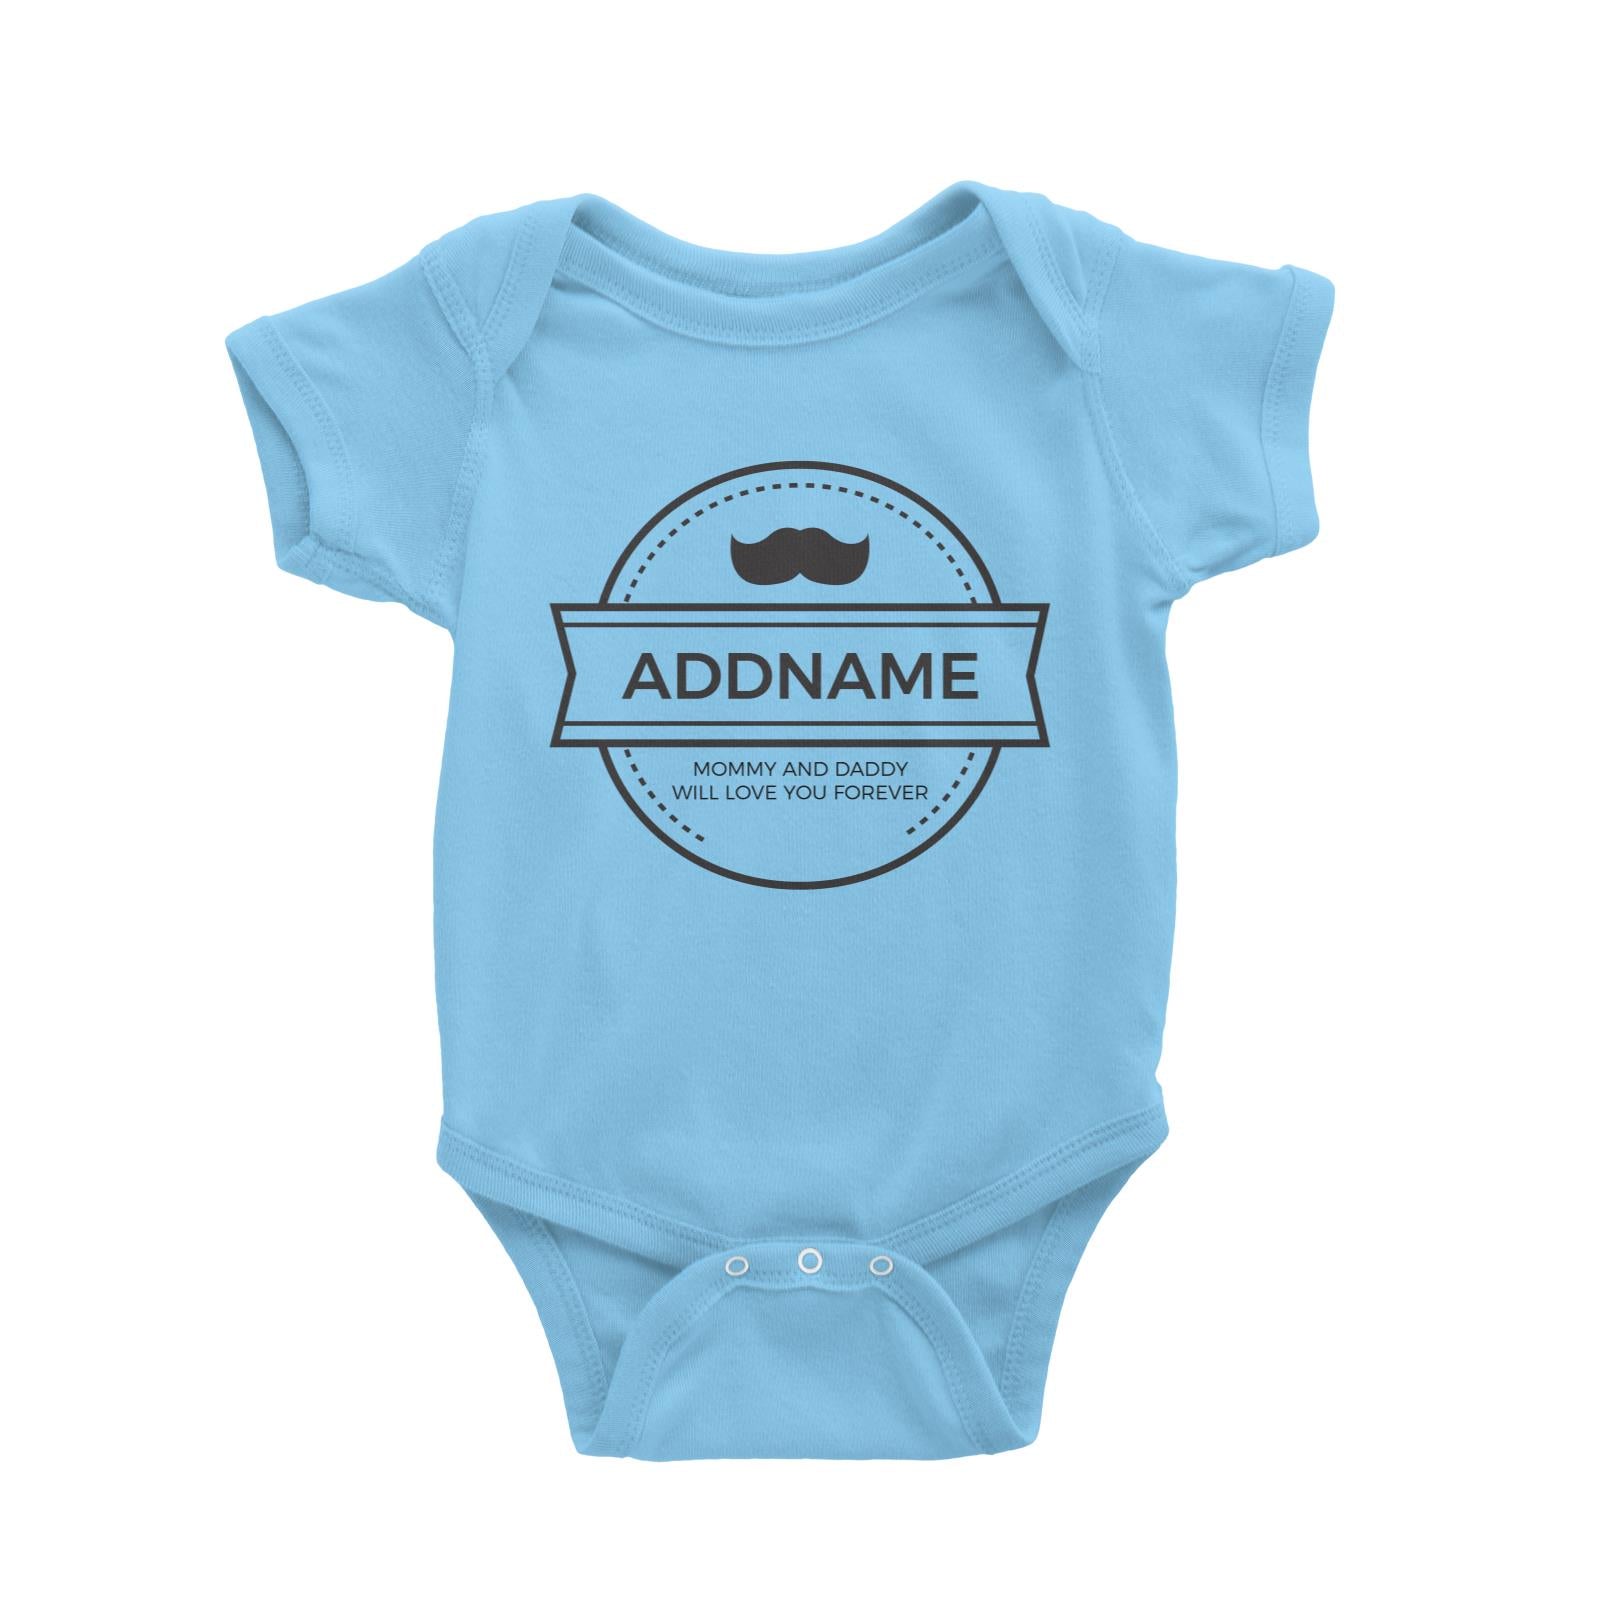 Moustache Emblem Personalizable with Name and Text Baby Romper